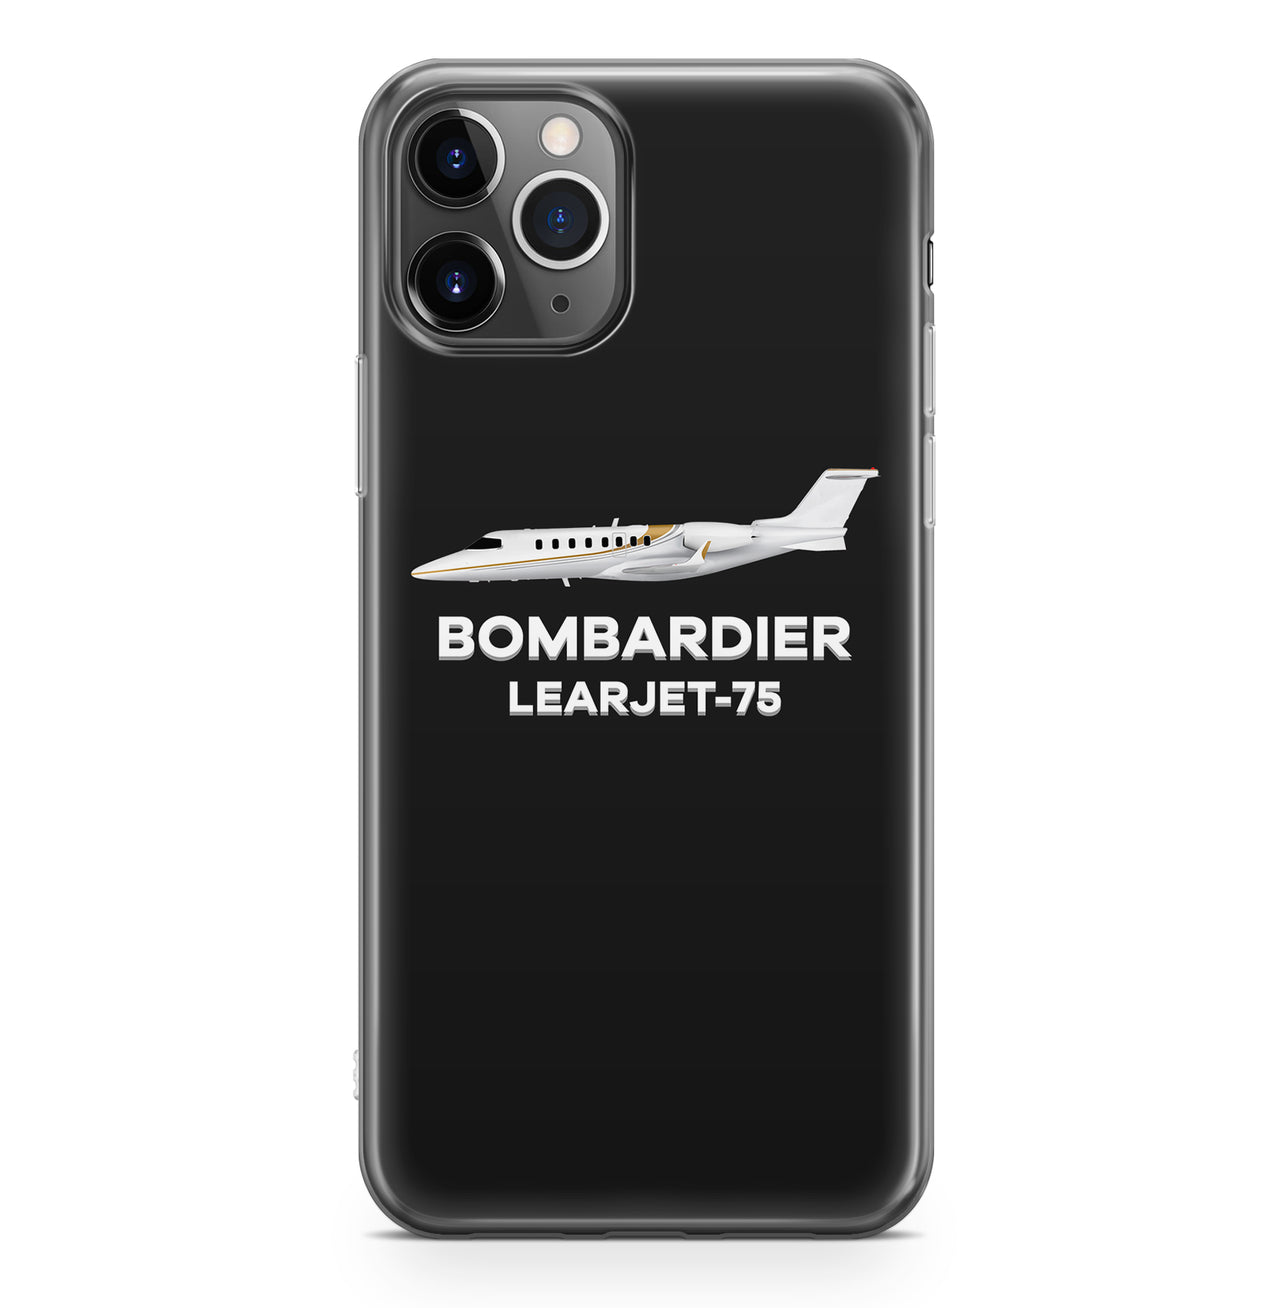 The Bombardier Learjet 75 Designed iPhone Cases